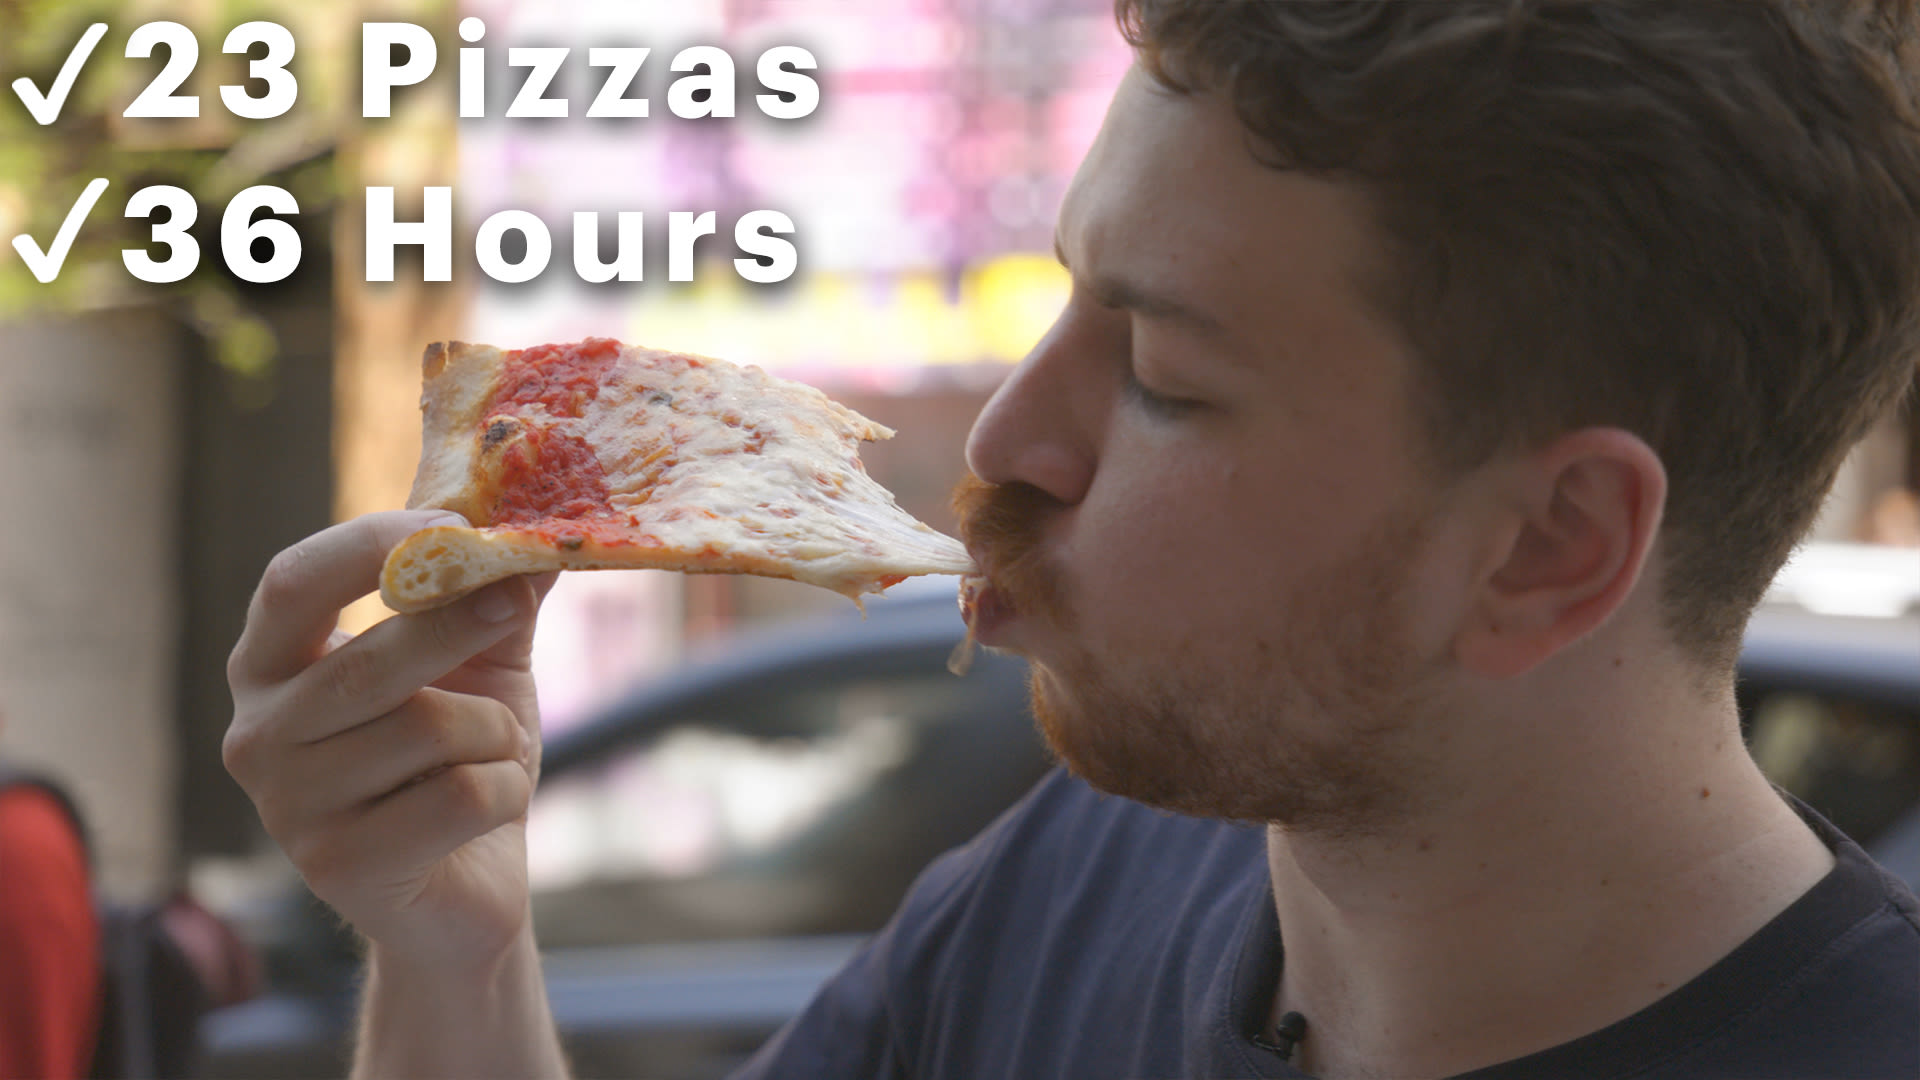 Craving a Slice? Try 2 Bros Pizza: NYC's Finest!